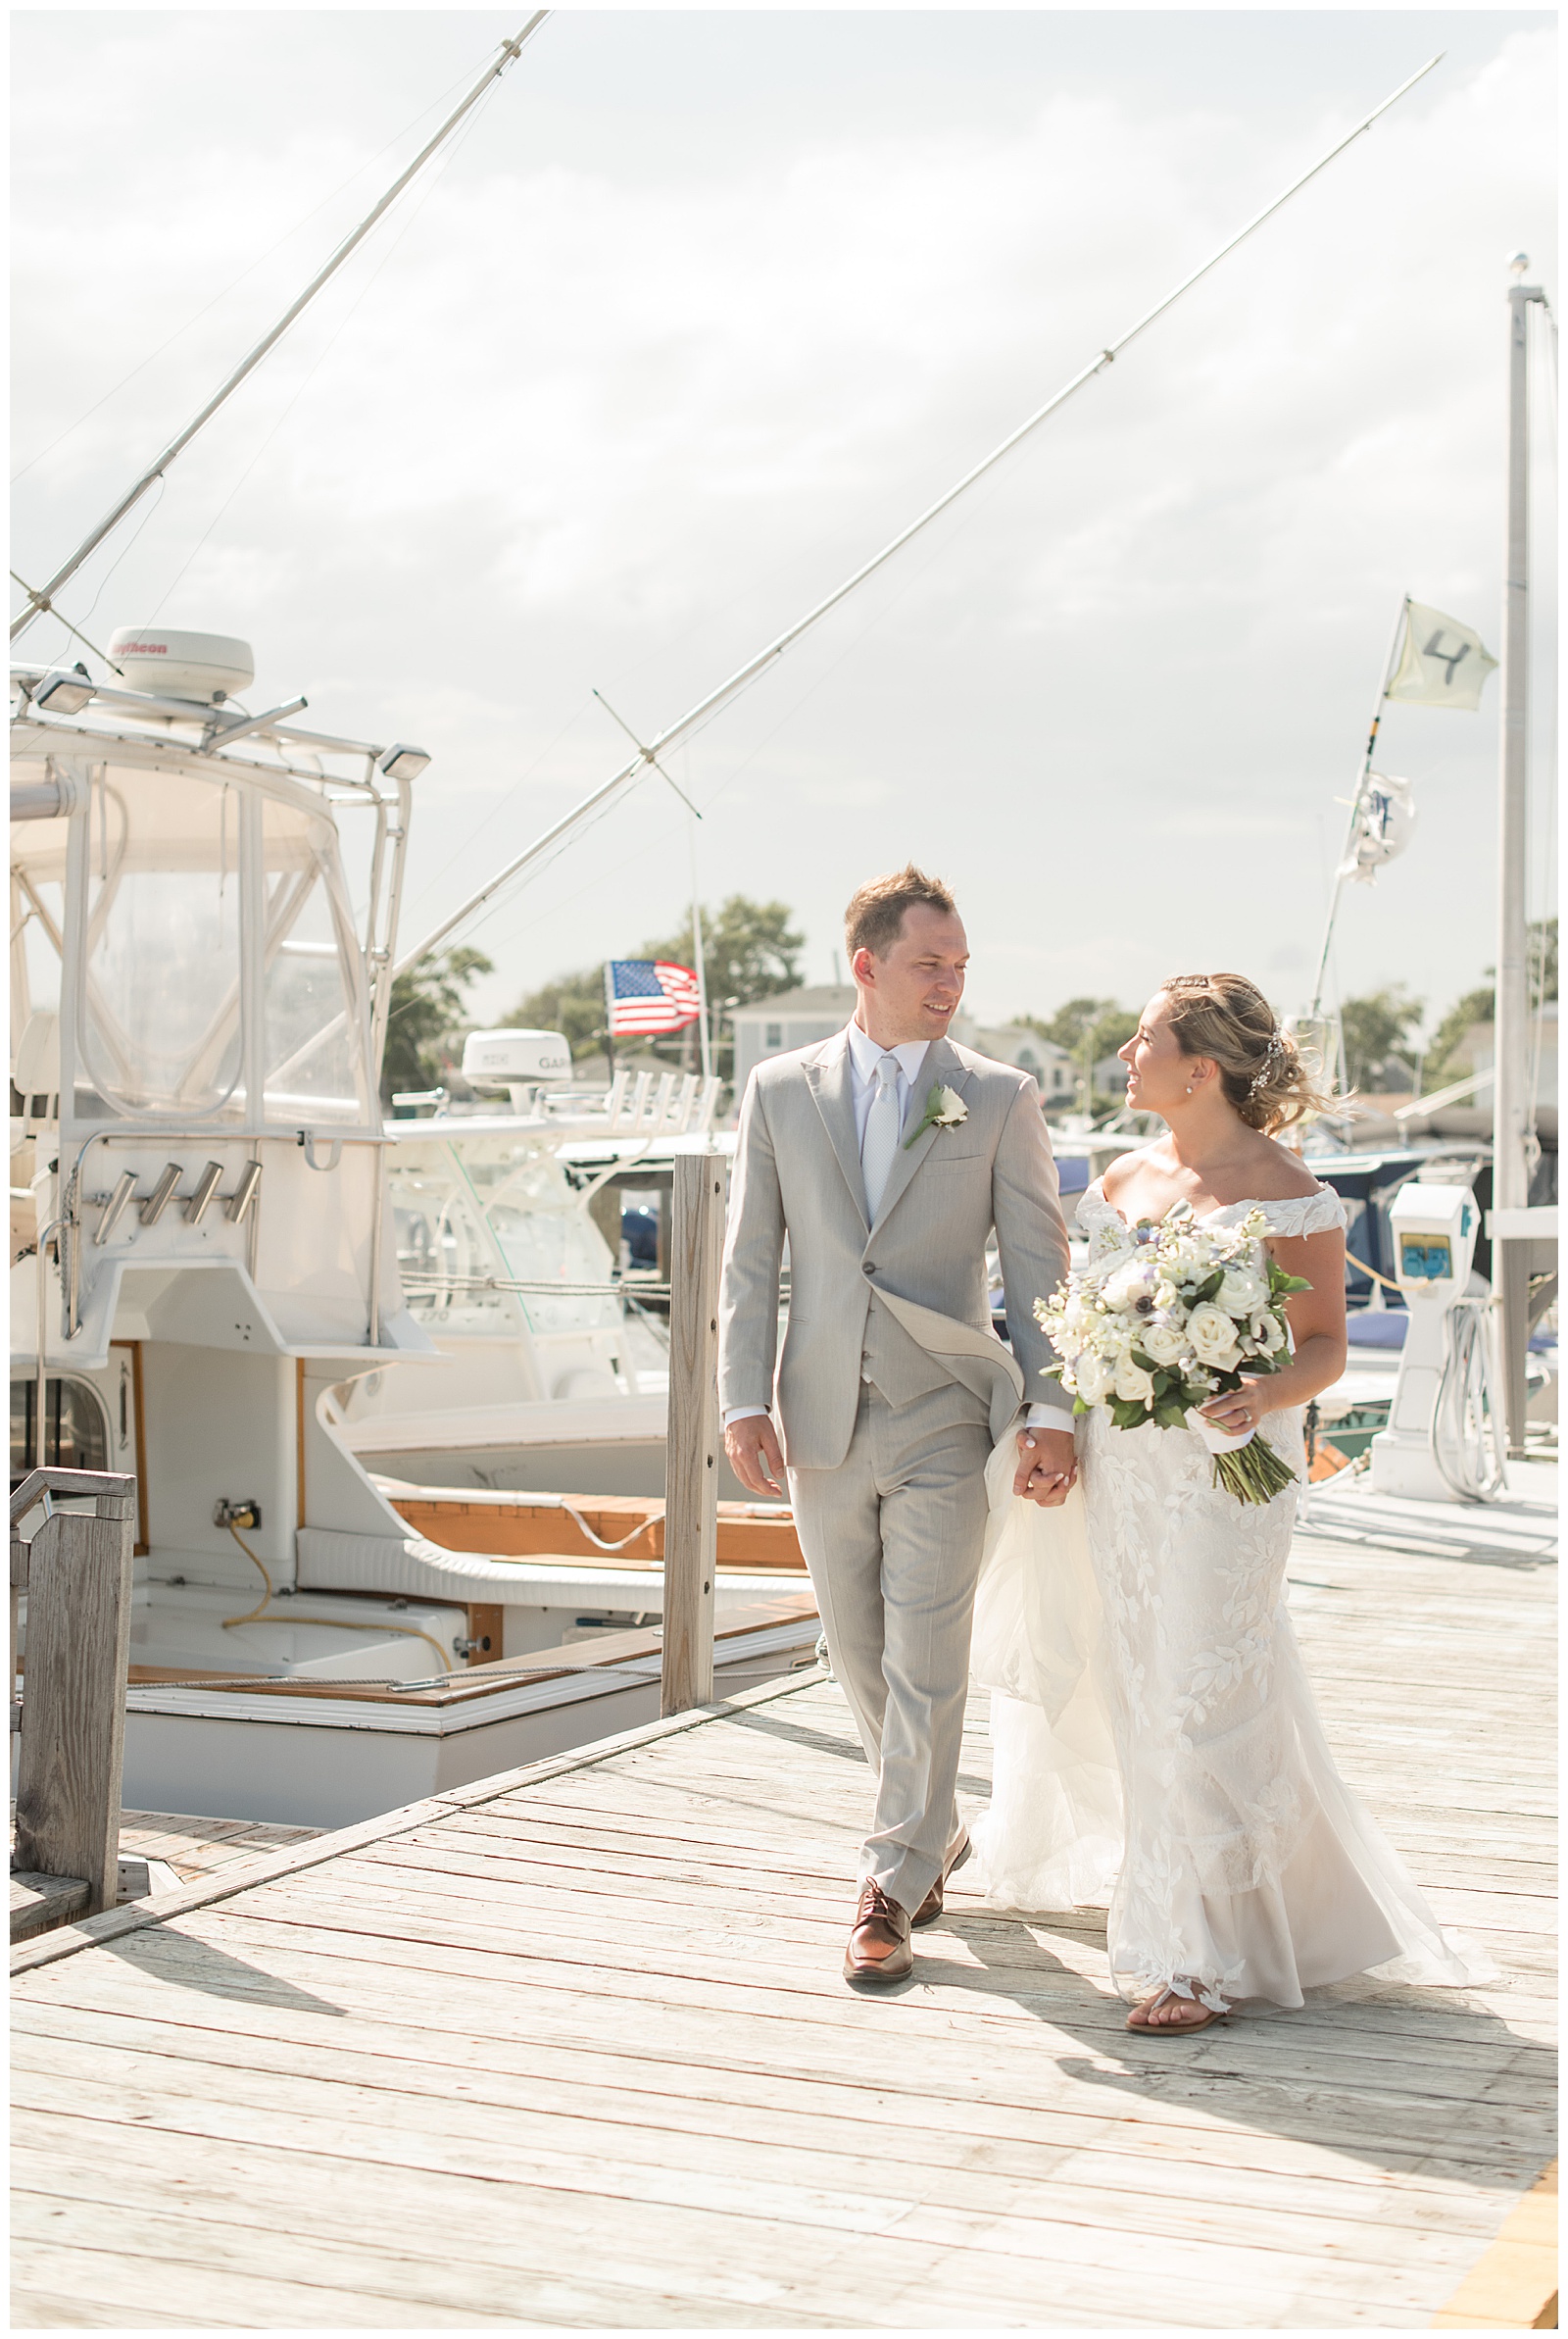 bride and groom holding hands and looking at each other as they walk along dock filled with boats on sunny day in bay shore new york